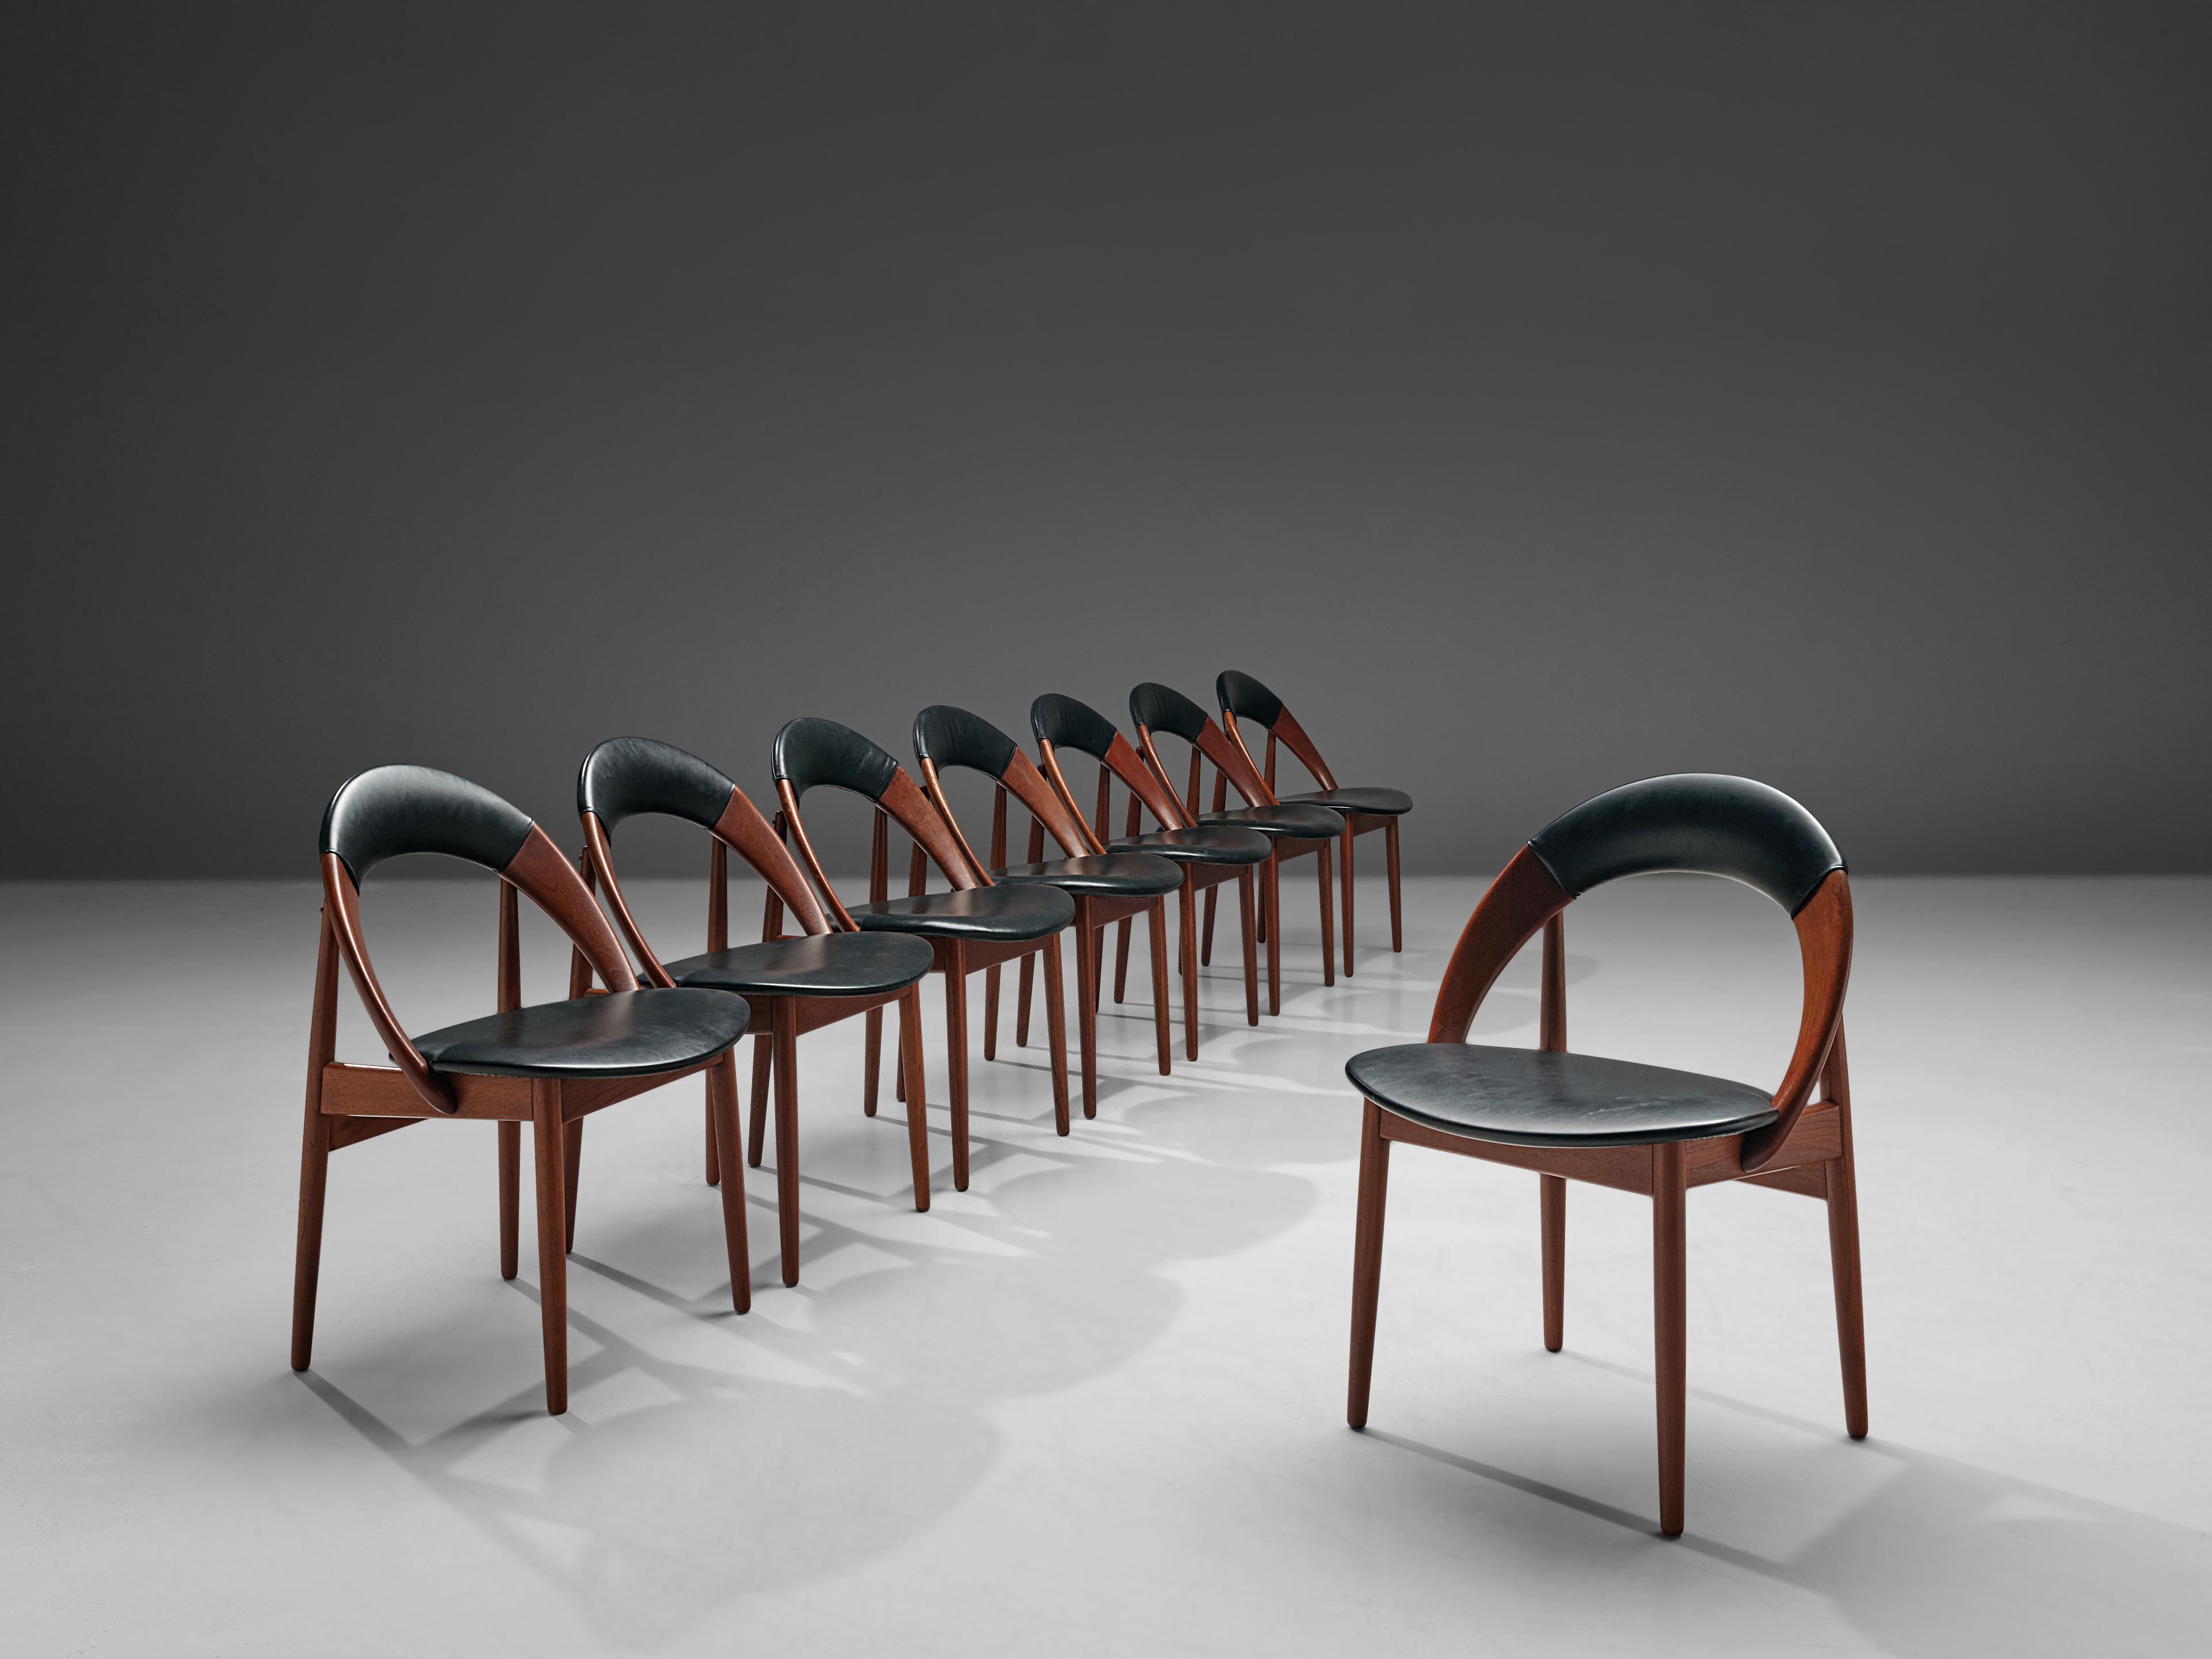 Arne Hovmand-Olsen, set of dining chairs, teak and leather, Denmark, 1960s.

Set of dining chairs designed by Arne Hovmand-Olsen. The chairs have a very simple and organic design. The rounded back goes in one flowing motion into the armrest and